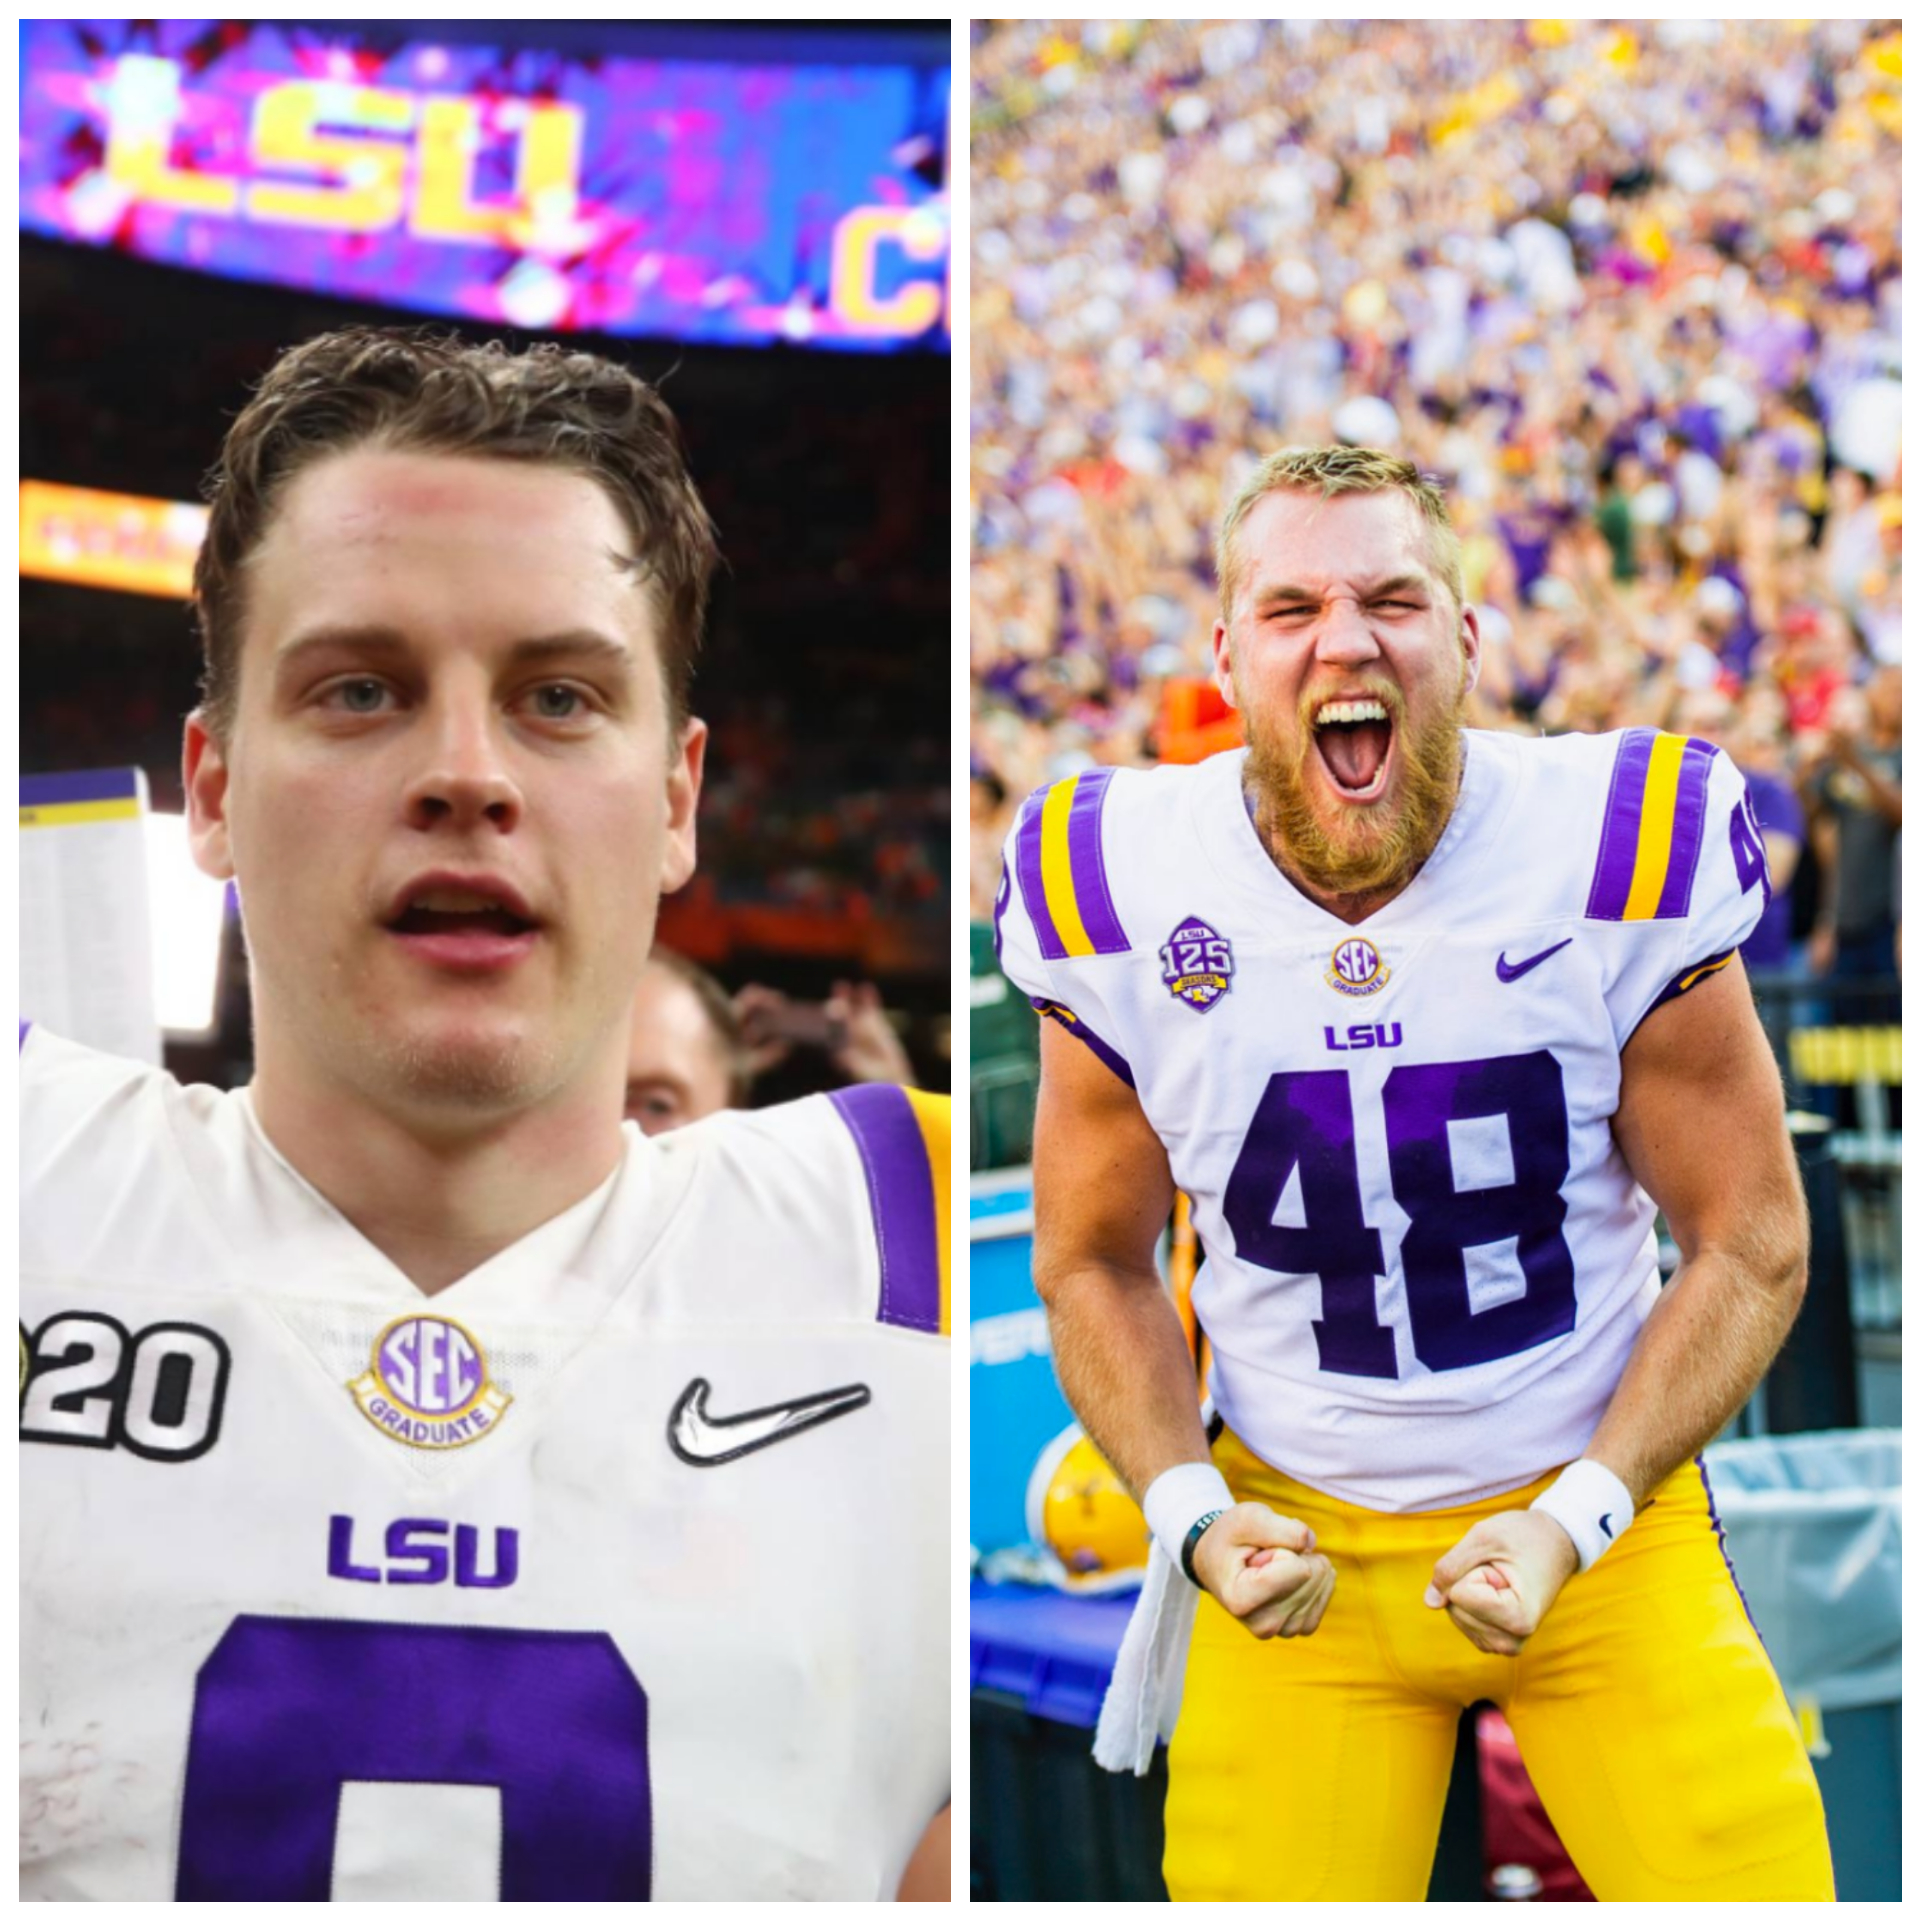 LSU’S BURROW AND FERGUSON NAMED TO NFF HAMPSHIRE HONOR SOCIETY